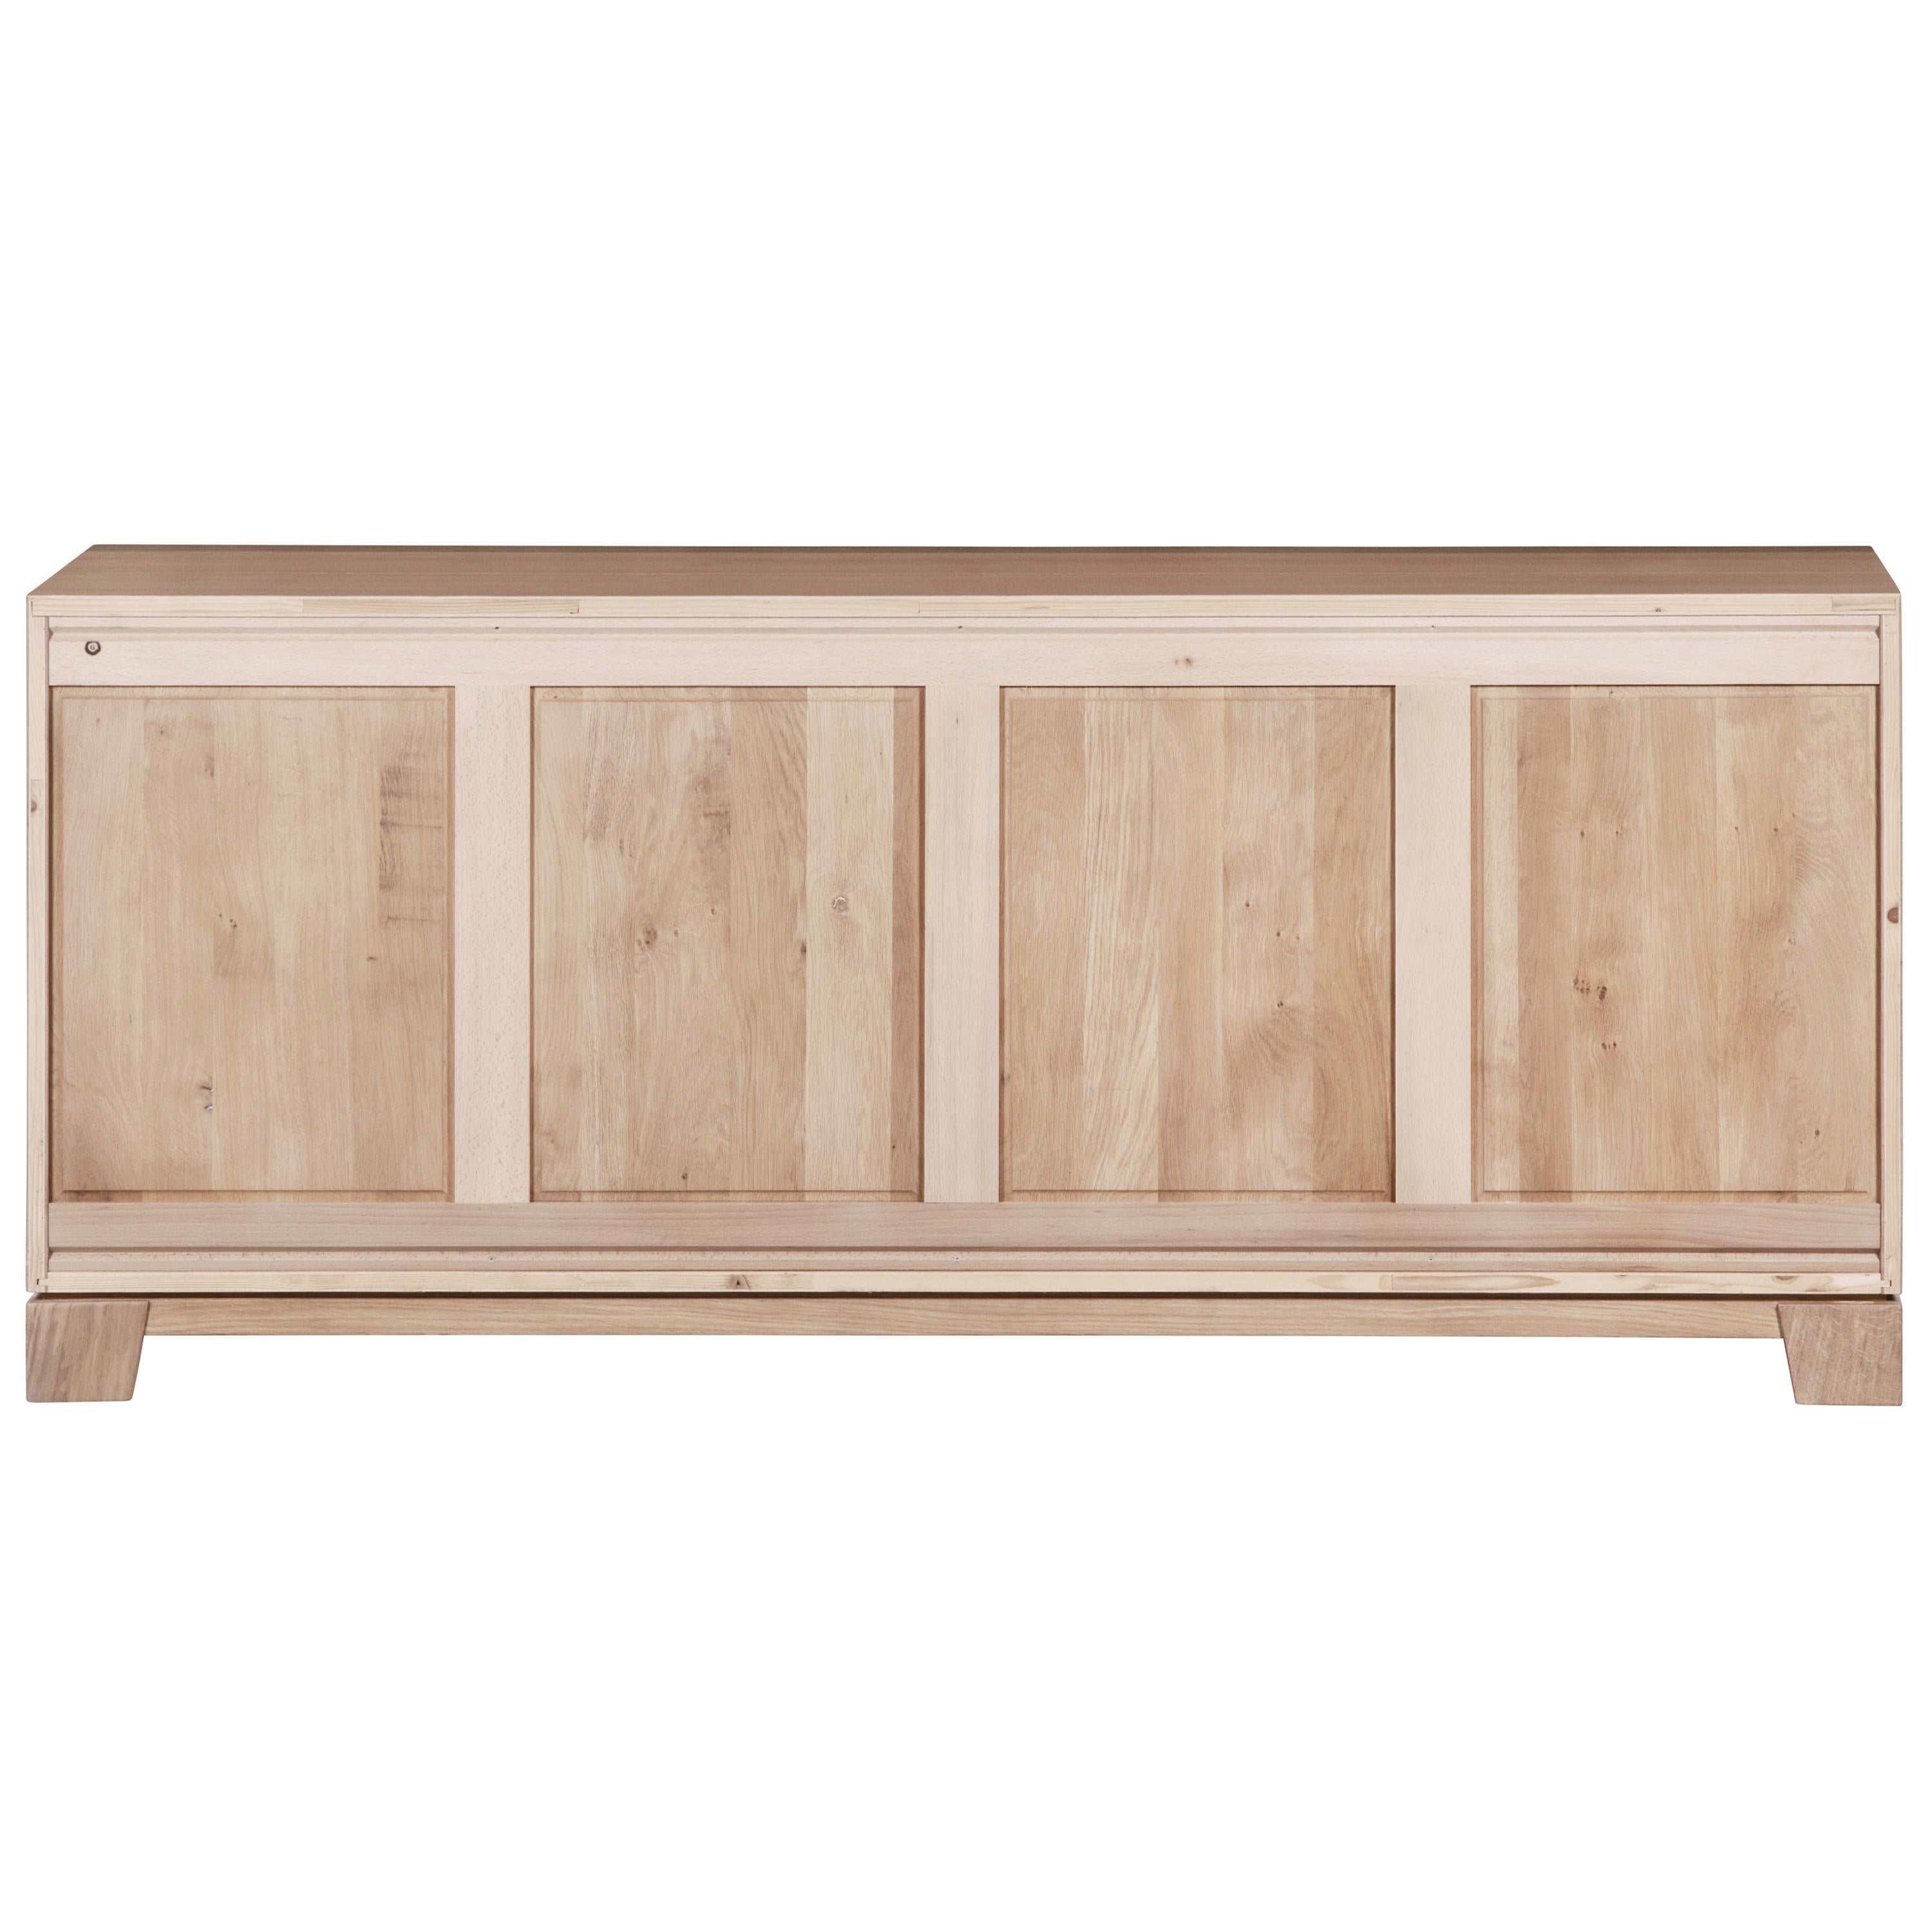 Contemporary 3-Door Sideboard with 3 Drawers in Natural Solid Oak, 100% Made in France For Sale